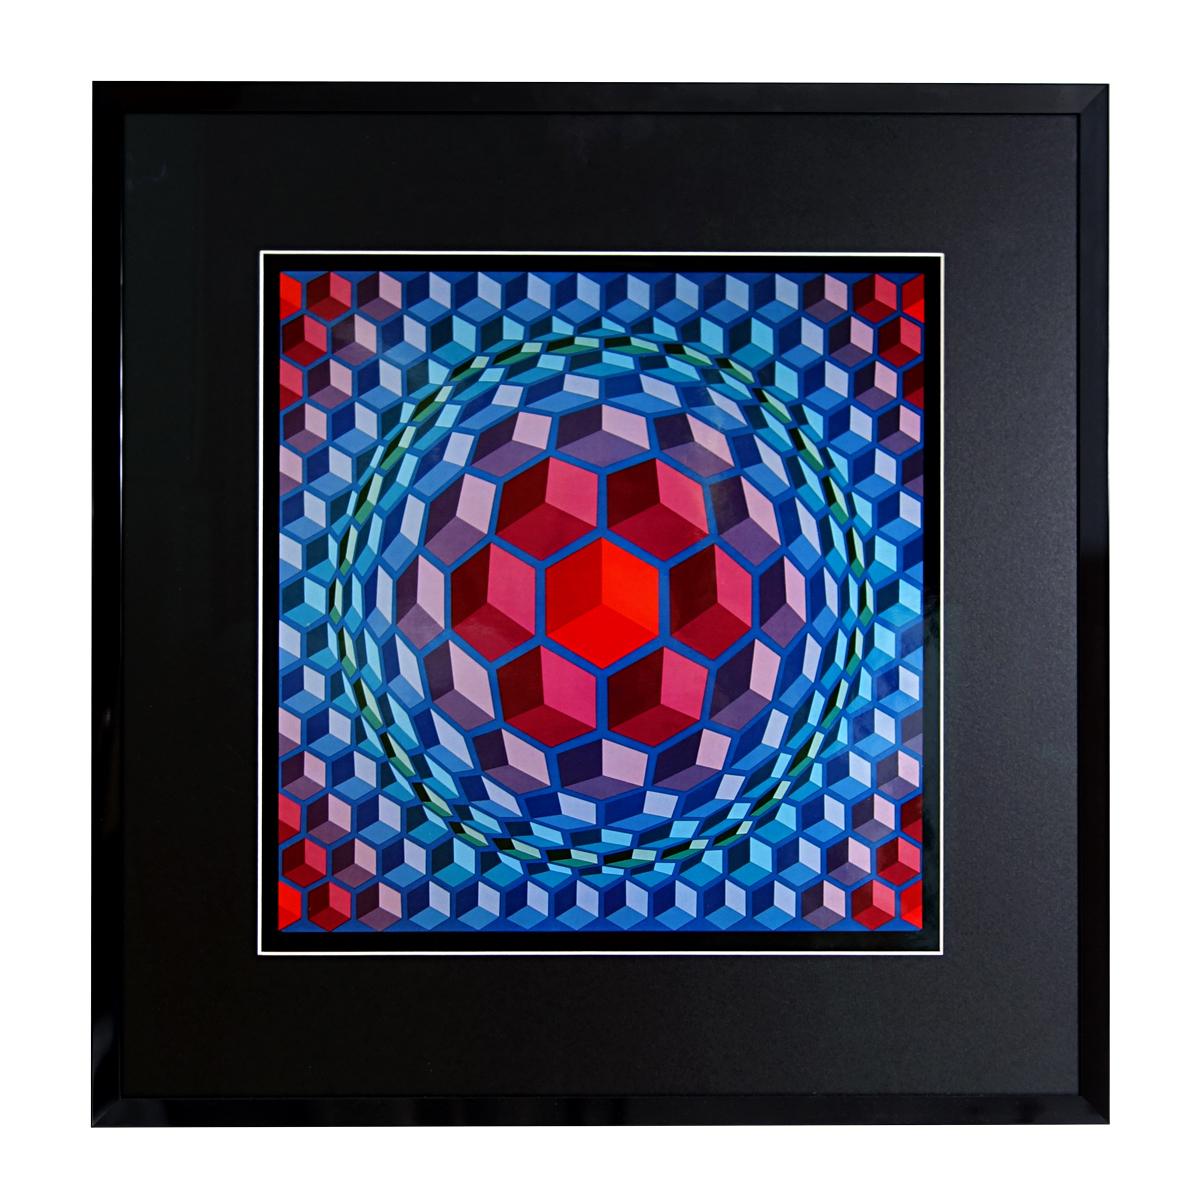 Op-Art Framed Poster Printed by Editions du Griffon, 1972 For Sale 2